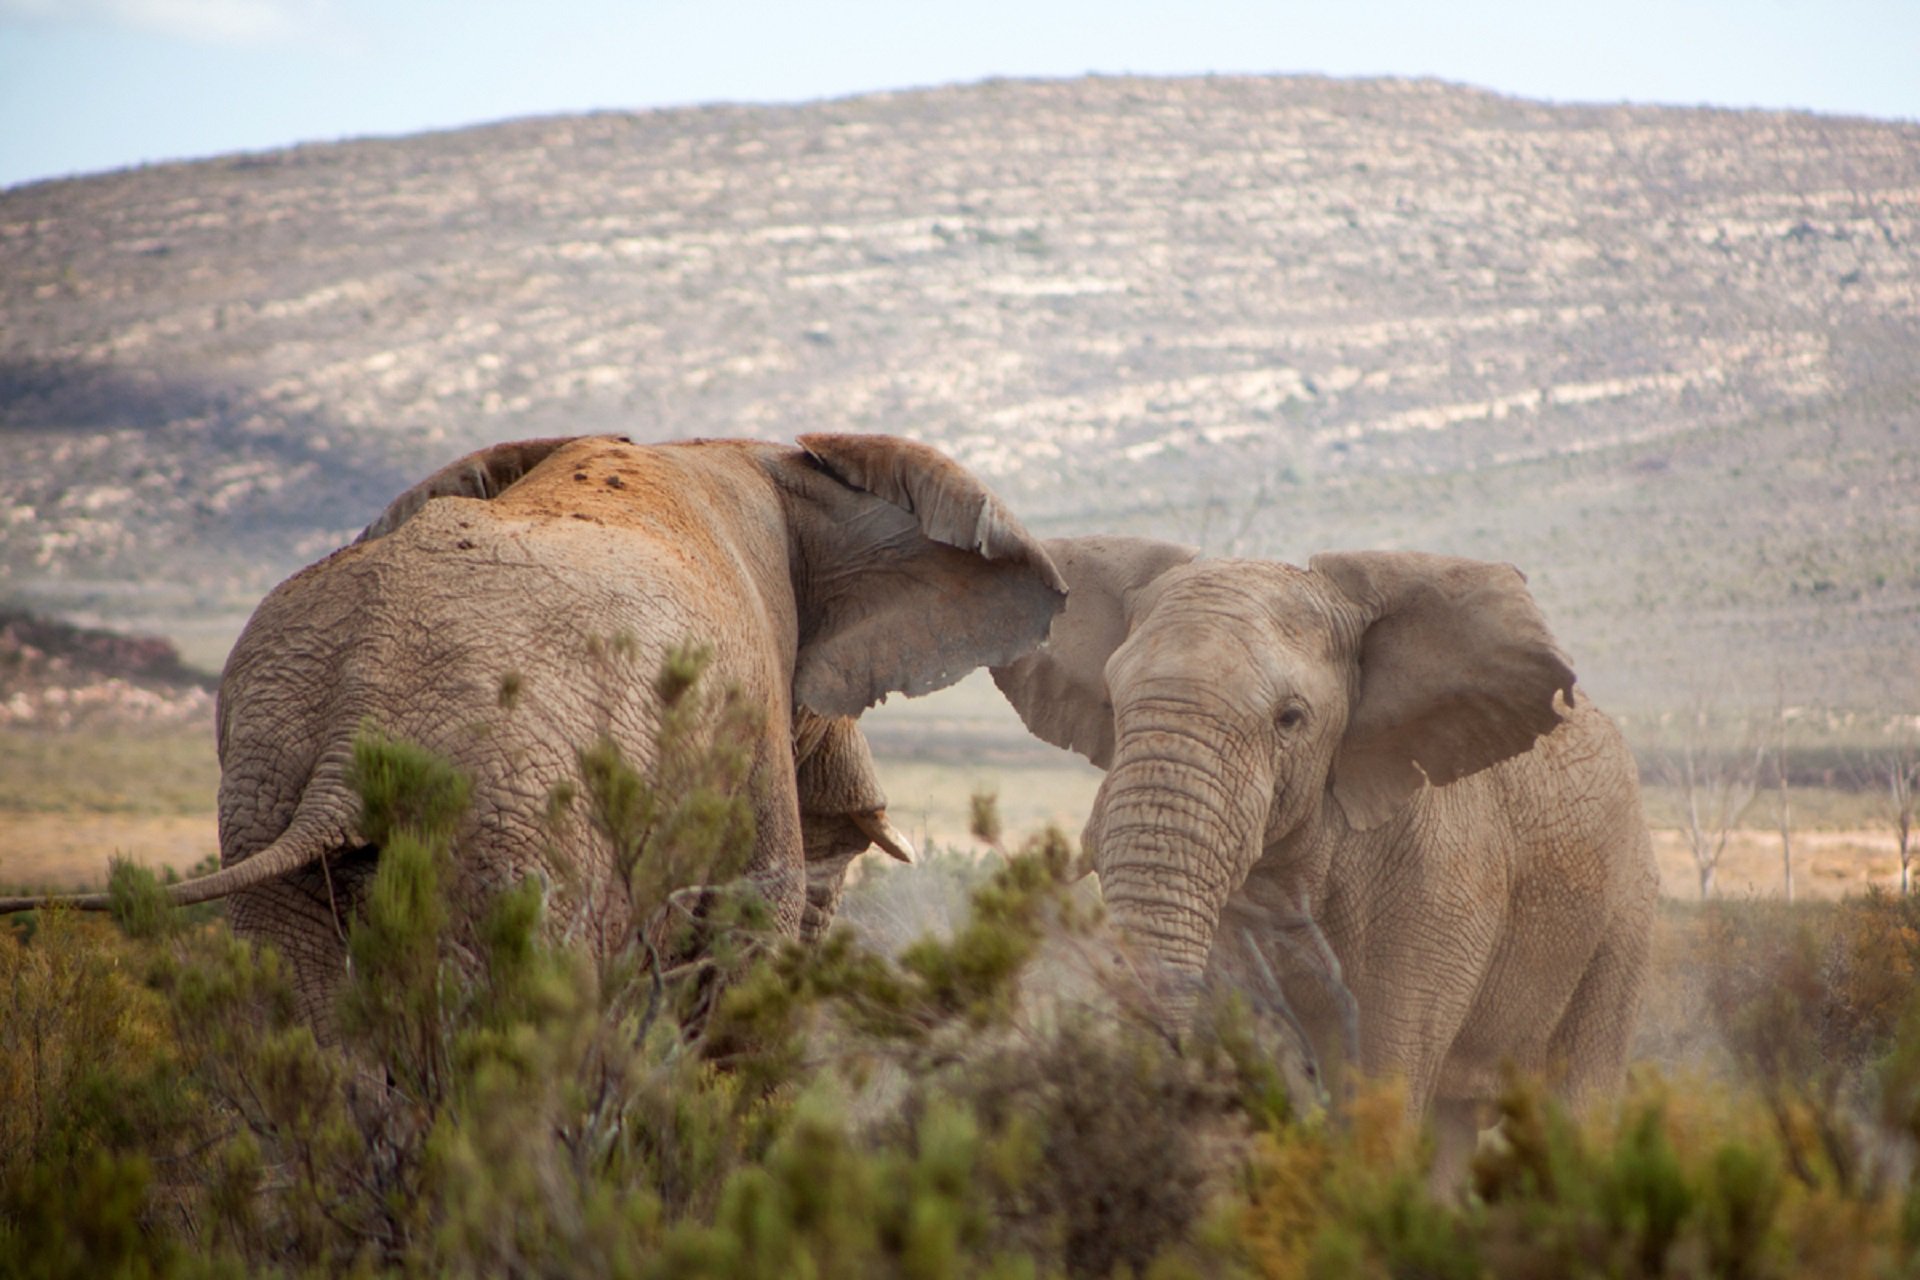 Beyond the classroom: Learn about Elephants